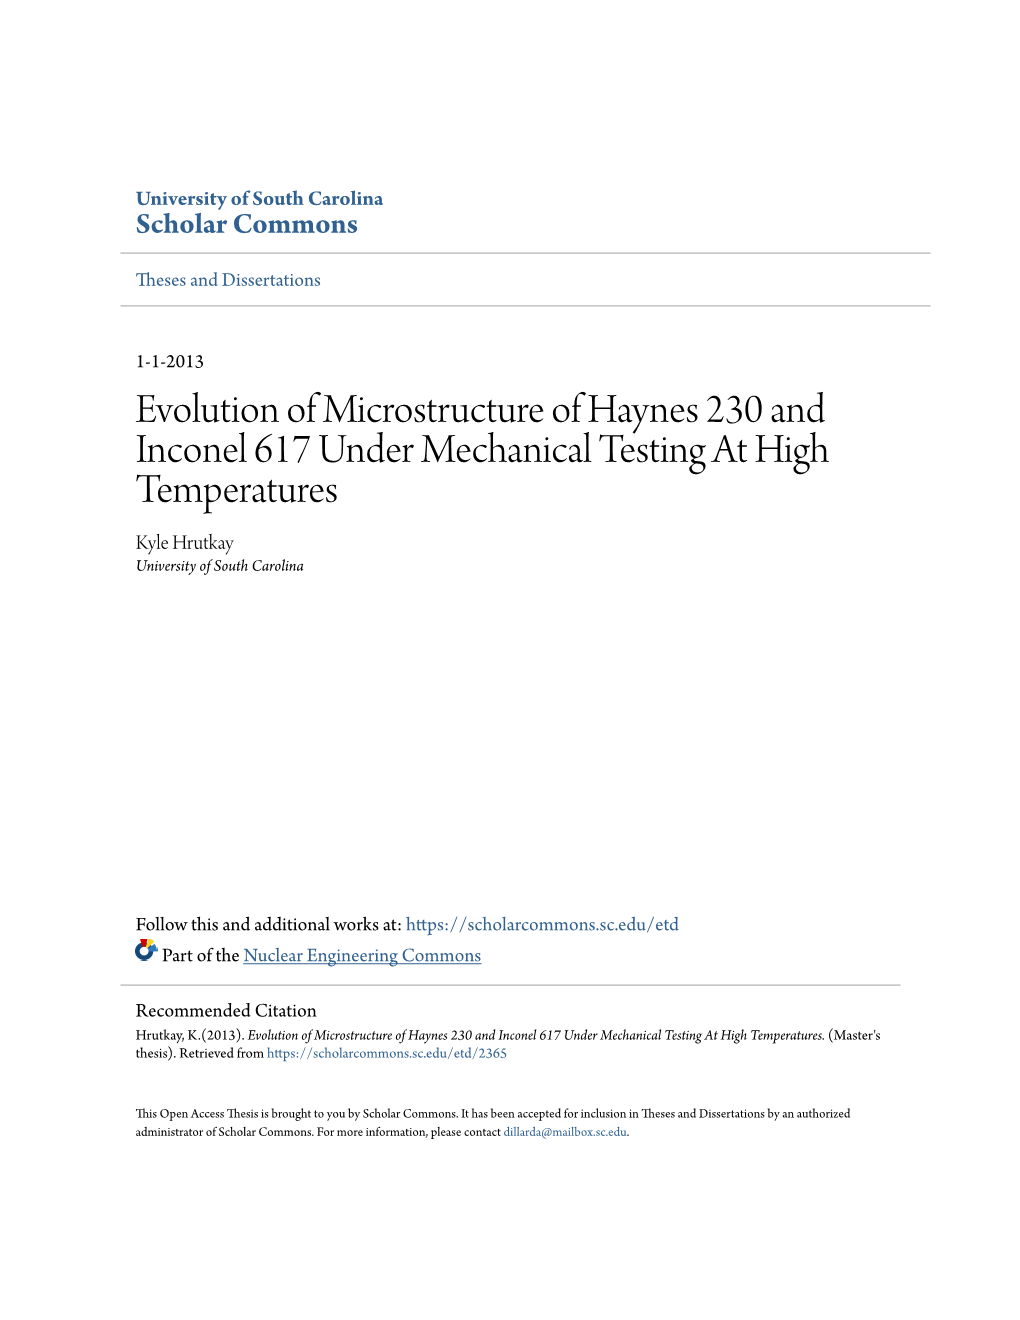 Evolution of Microstructure of Haynes 230 and Inconel 617 Under Mechanical Testing at High Temperatures Kyle Hrutkay University of South Carolina